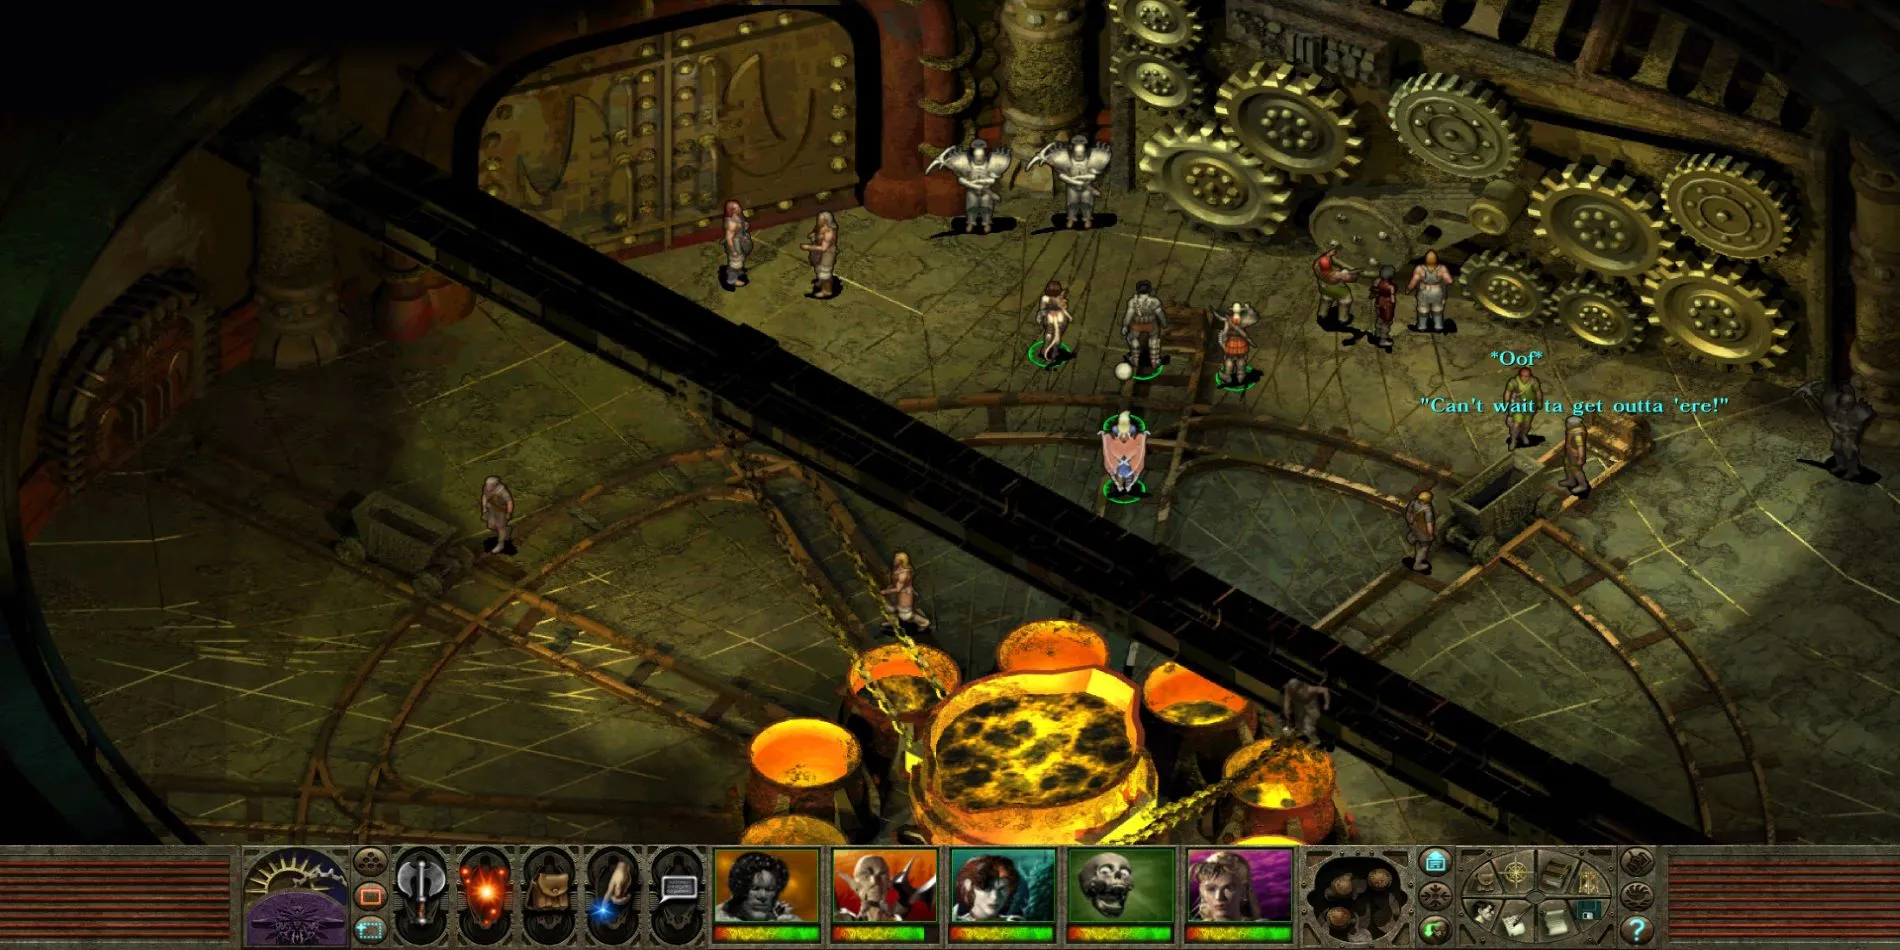 Planescape: Torment players standing by gears